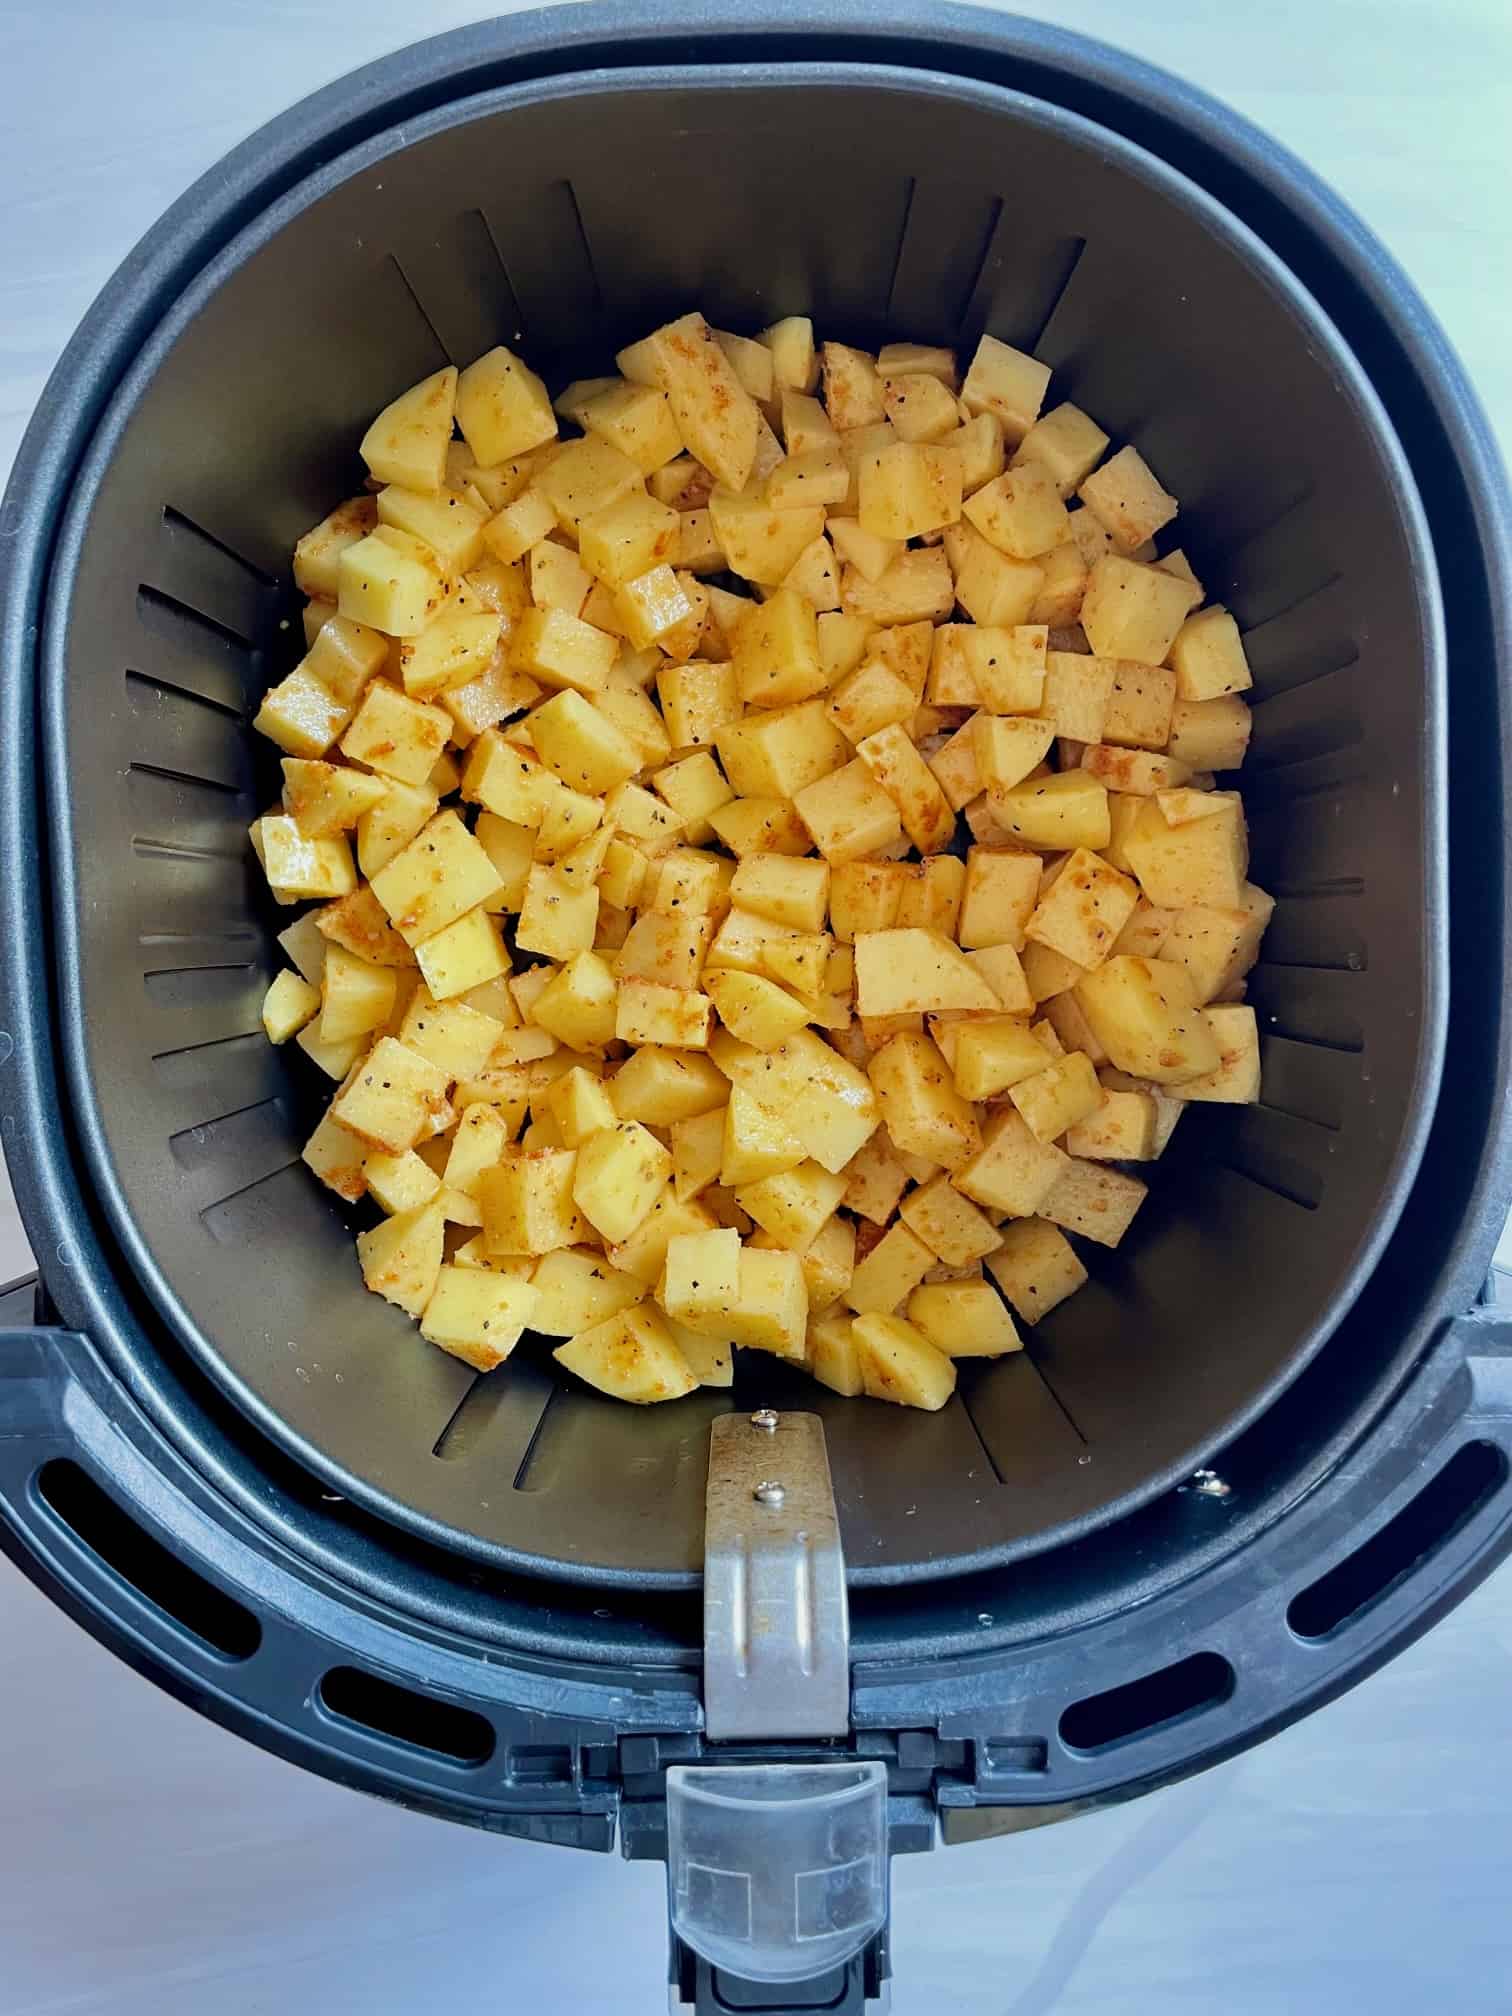 Chopped potatoes in the bottom of an air fryer basket.